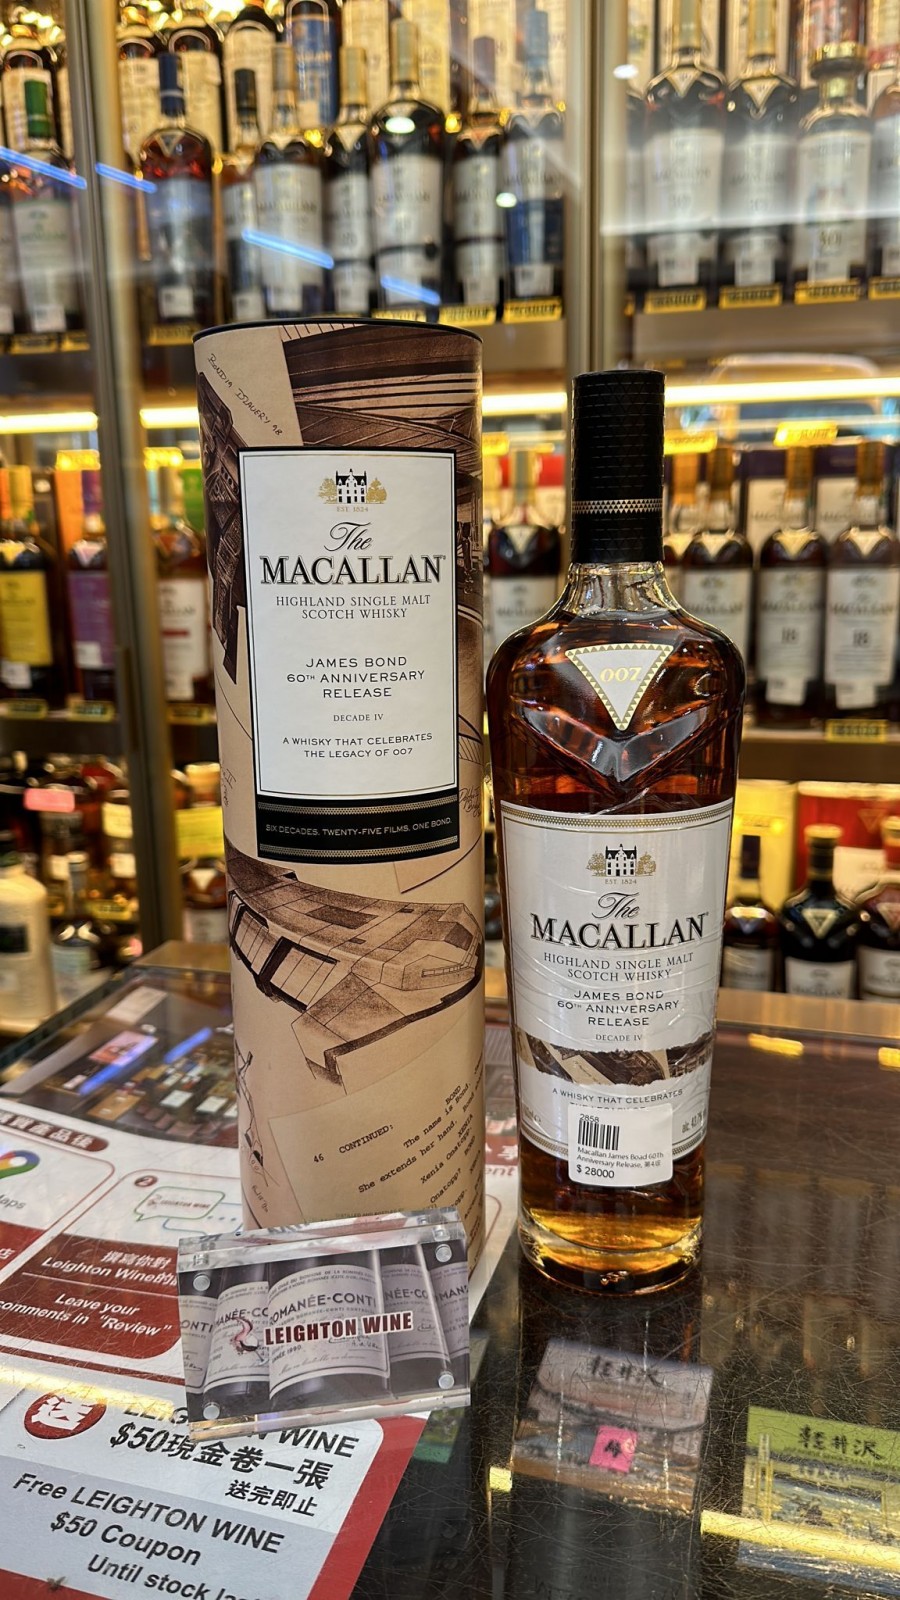 The Macallan James Bond 60th Anniversary Release Decade IV | 70cl/43.7%